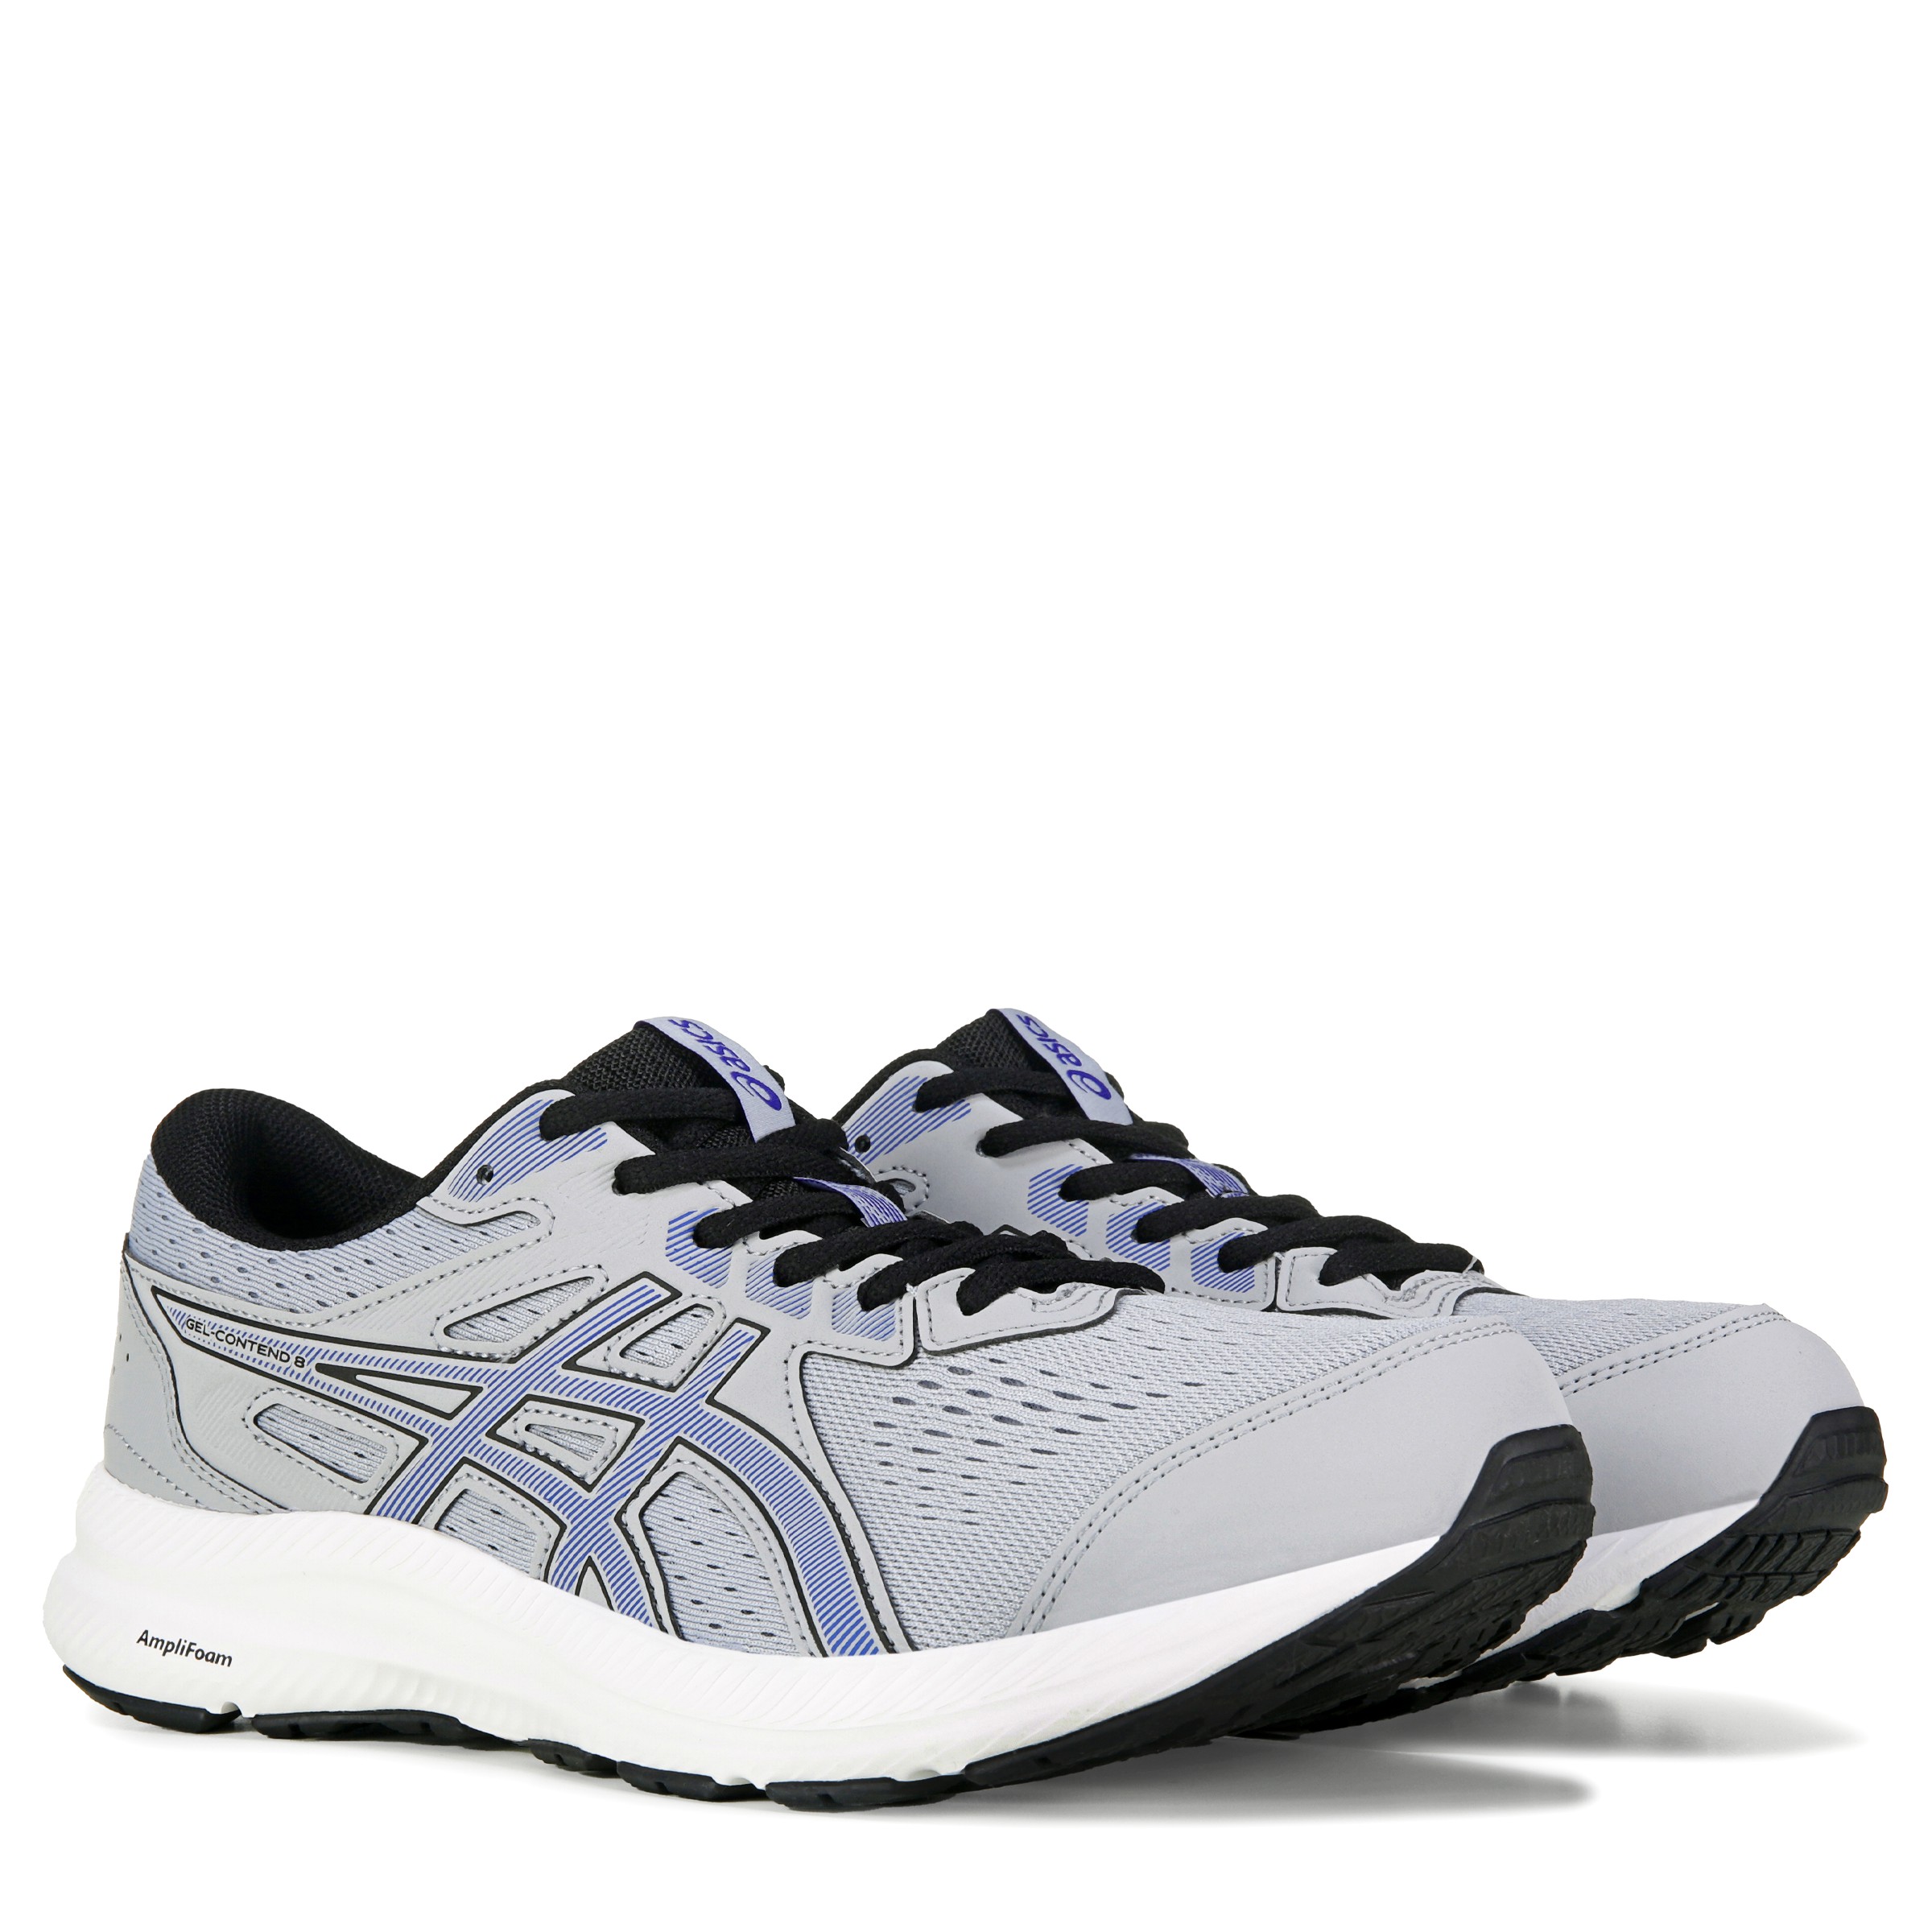 admire Bearing circle every time ASICS Men's GEL Contend 8 Wide Running Shoe | Famous Footwear